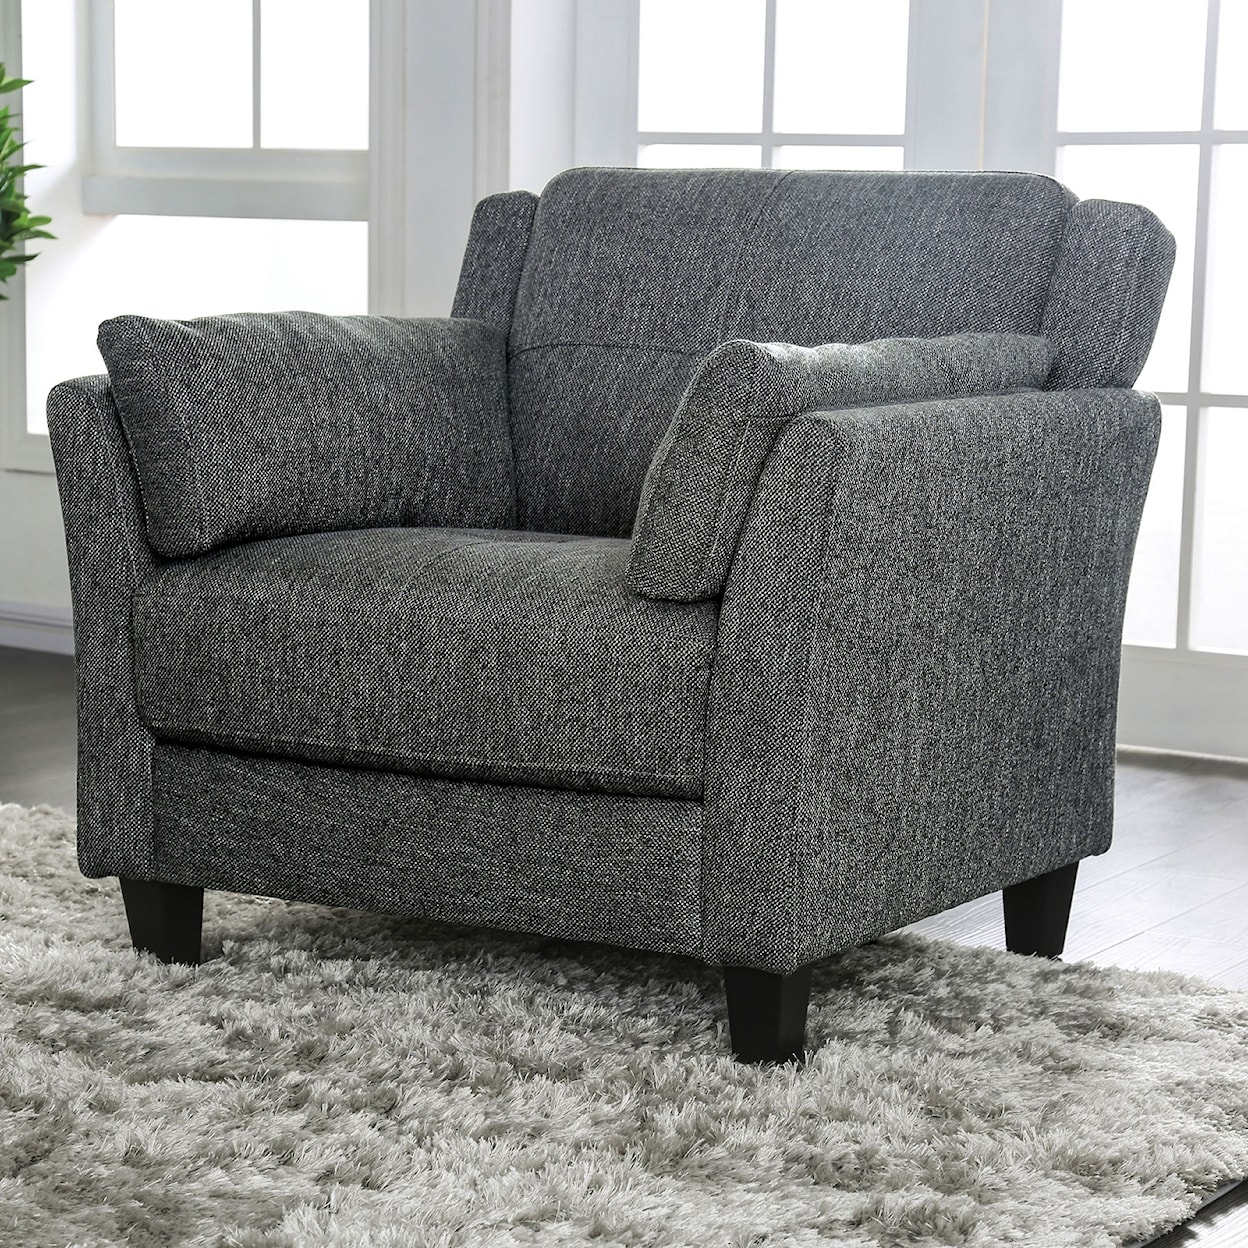 Furniture of America Yazmin Upholstered Chair